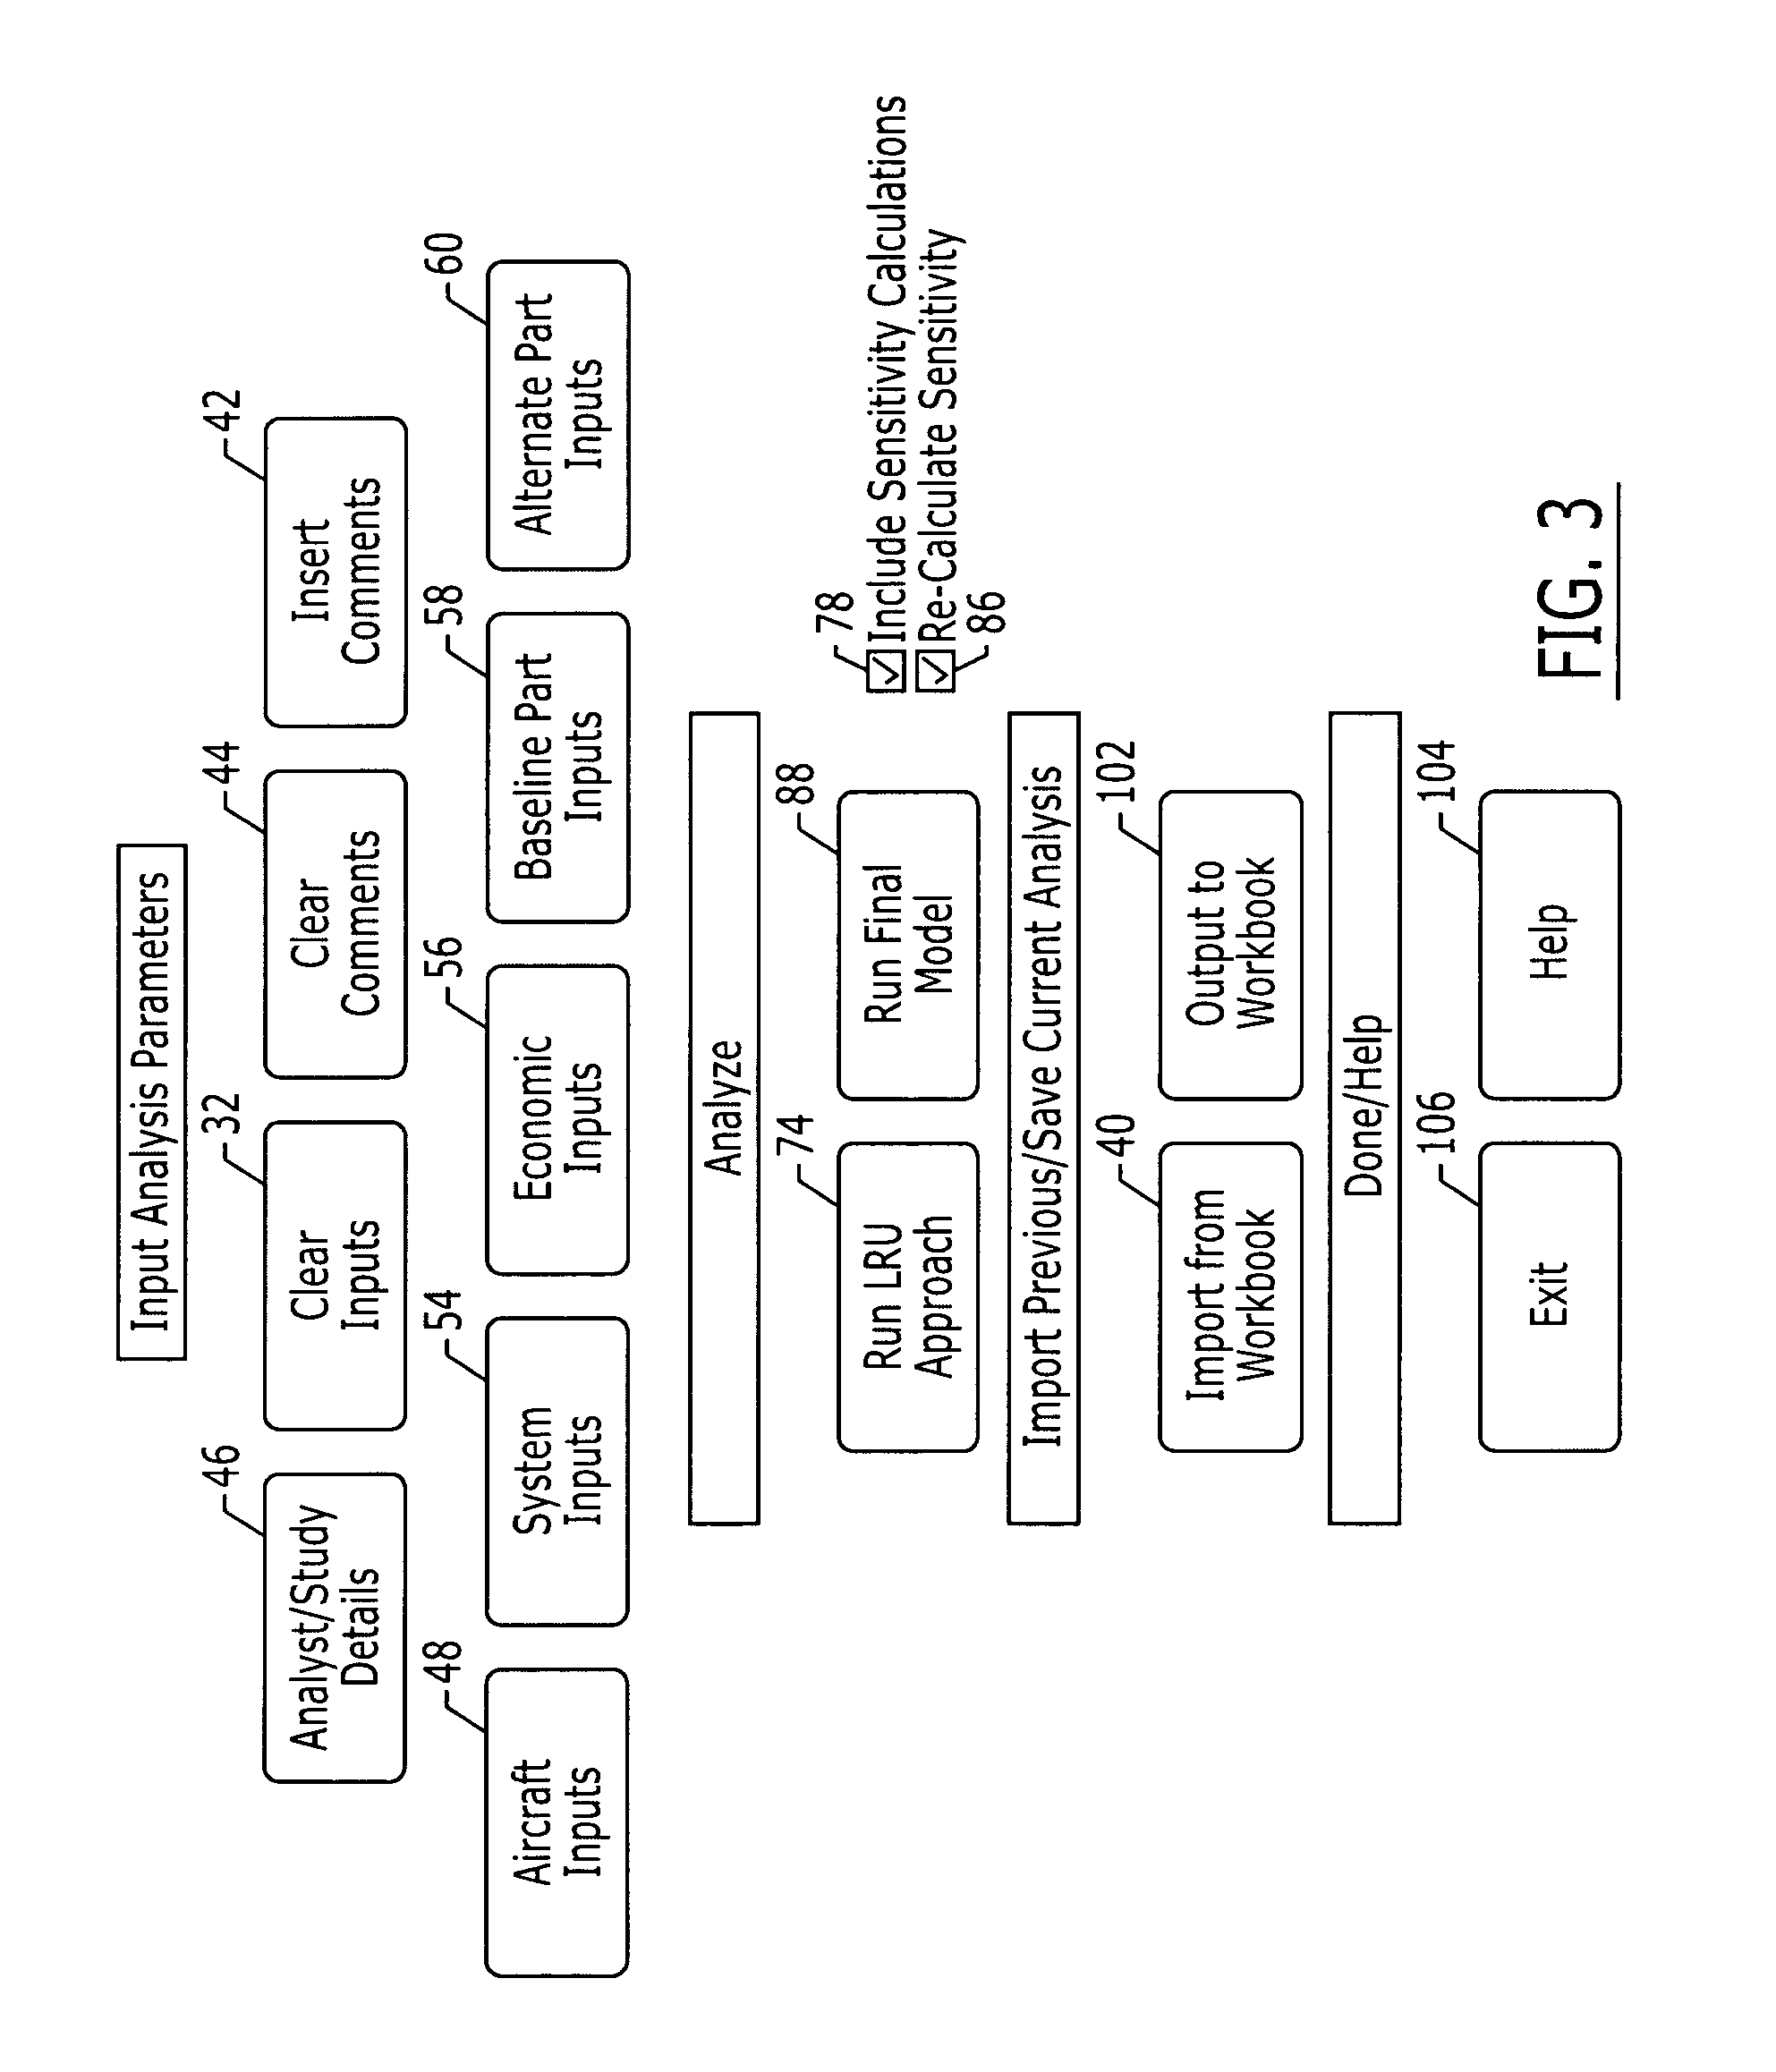 Method and system for evaluating costs of various design and maintenance approaches